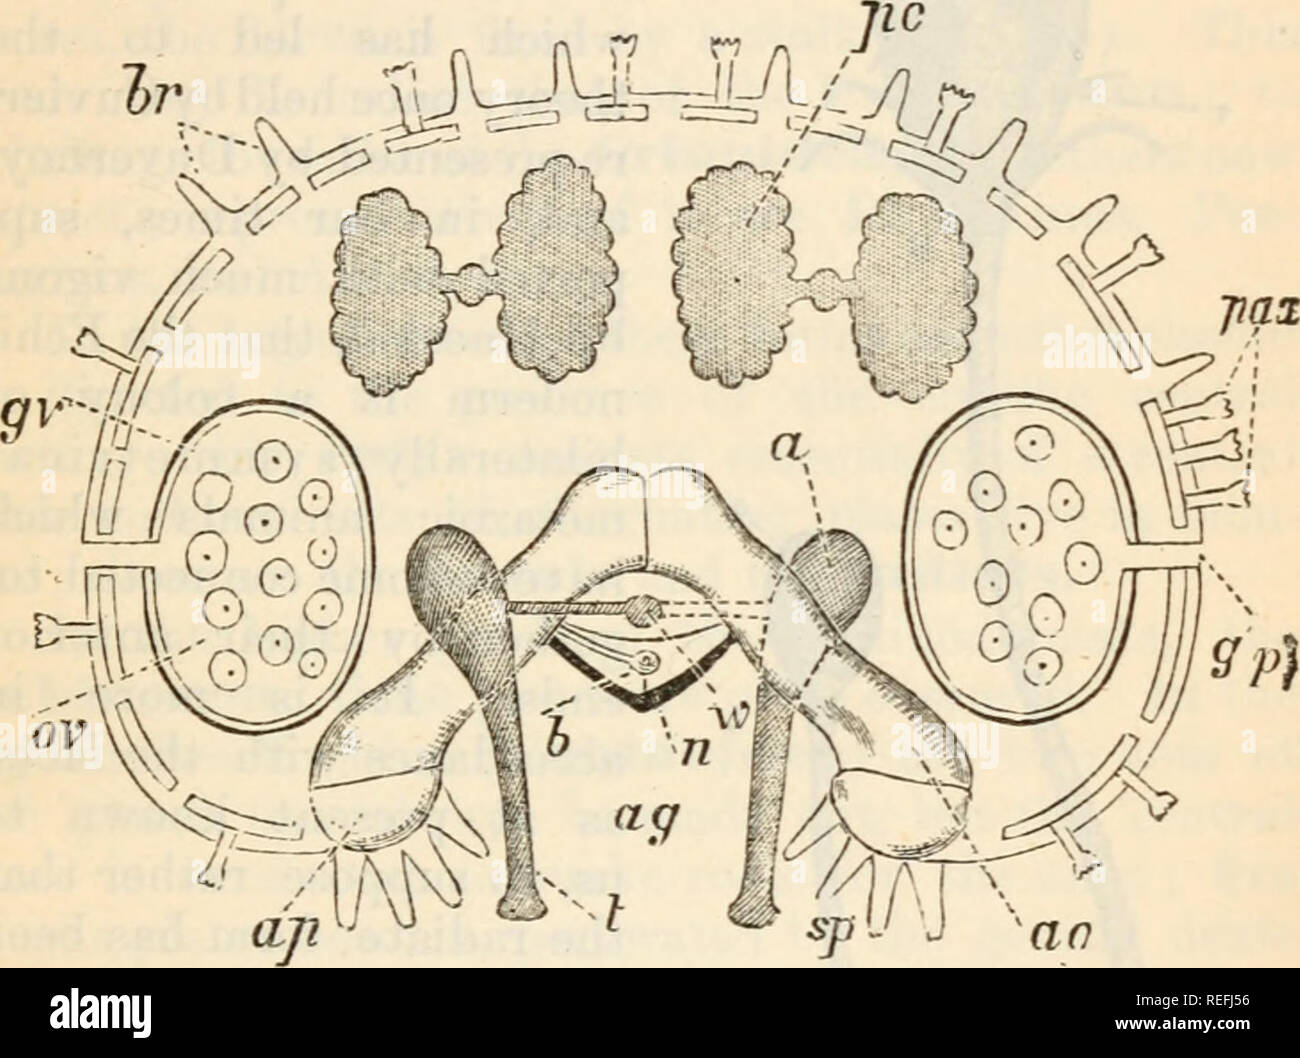 https://c8.alamy.com/comp/REFJ56/comparative-anatomy-and-physiology-chap-iii-echinoderms-61-tube-feet-were-placed-as-the-u-walksquot-or-ambulacra-and-we-may-therefore-speak-of-the-ossicles-or-plates-which-specially-support-and-protect-the-tube-feet-as-the-ambulacral-plates-or-ossicles-accom-panying-the-radial-water-vessel-is-a-nerve-trunk-and-i-23diagram-of-a-cross-section-of-an-avin-of-a-common-starfish-wisterias-rubens-on-the-left-side-the-section-is-suppled-to-pass-between-two-of-the-ambulacra!-ossicles-but-on-the-right-side-through-one-of-them-no-ag-ambulacra!-groove-n-radial-nerve-6-radial-REFJ56.jpg